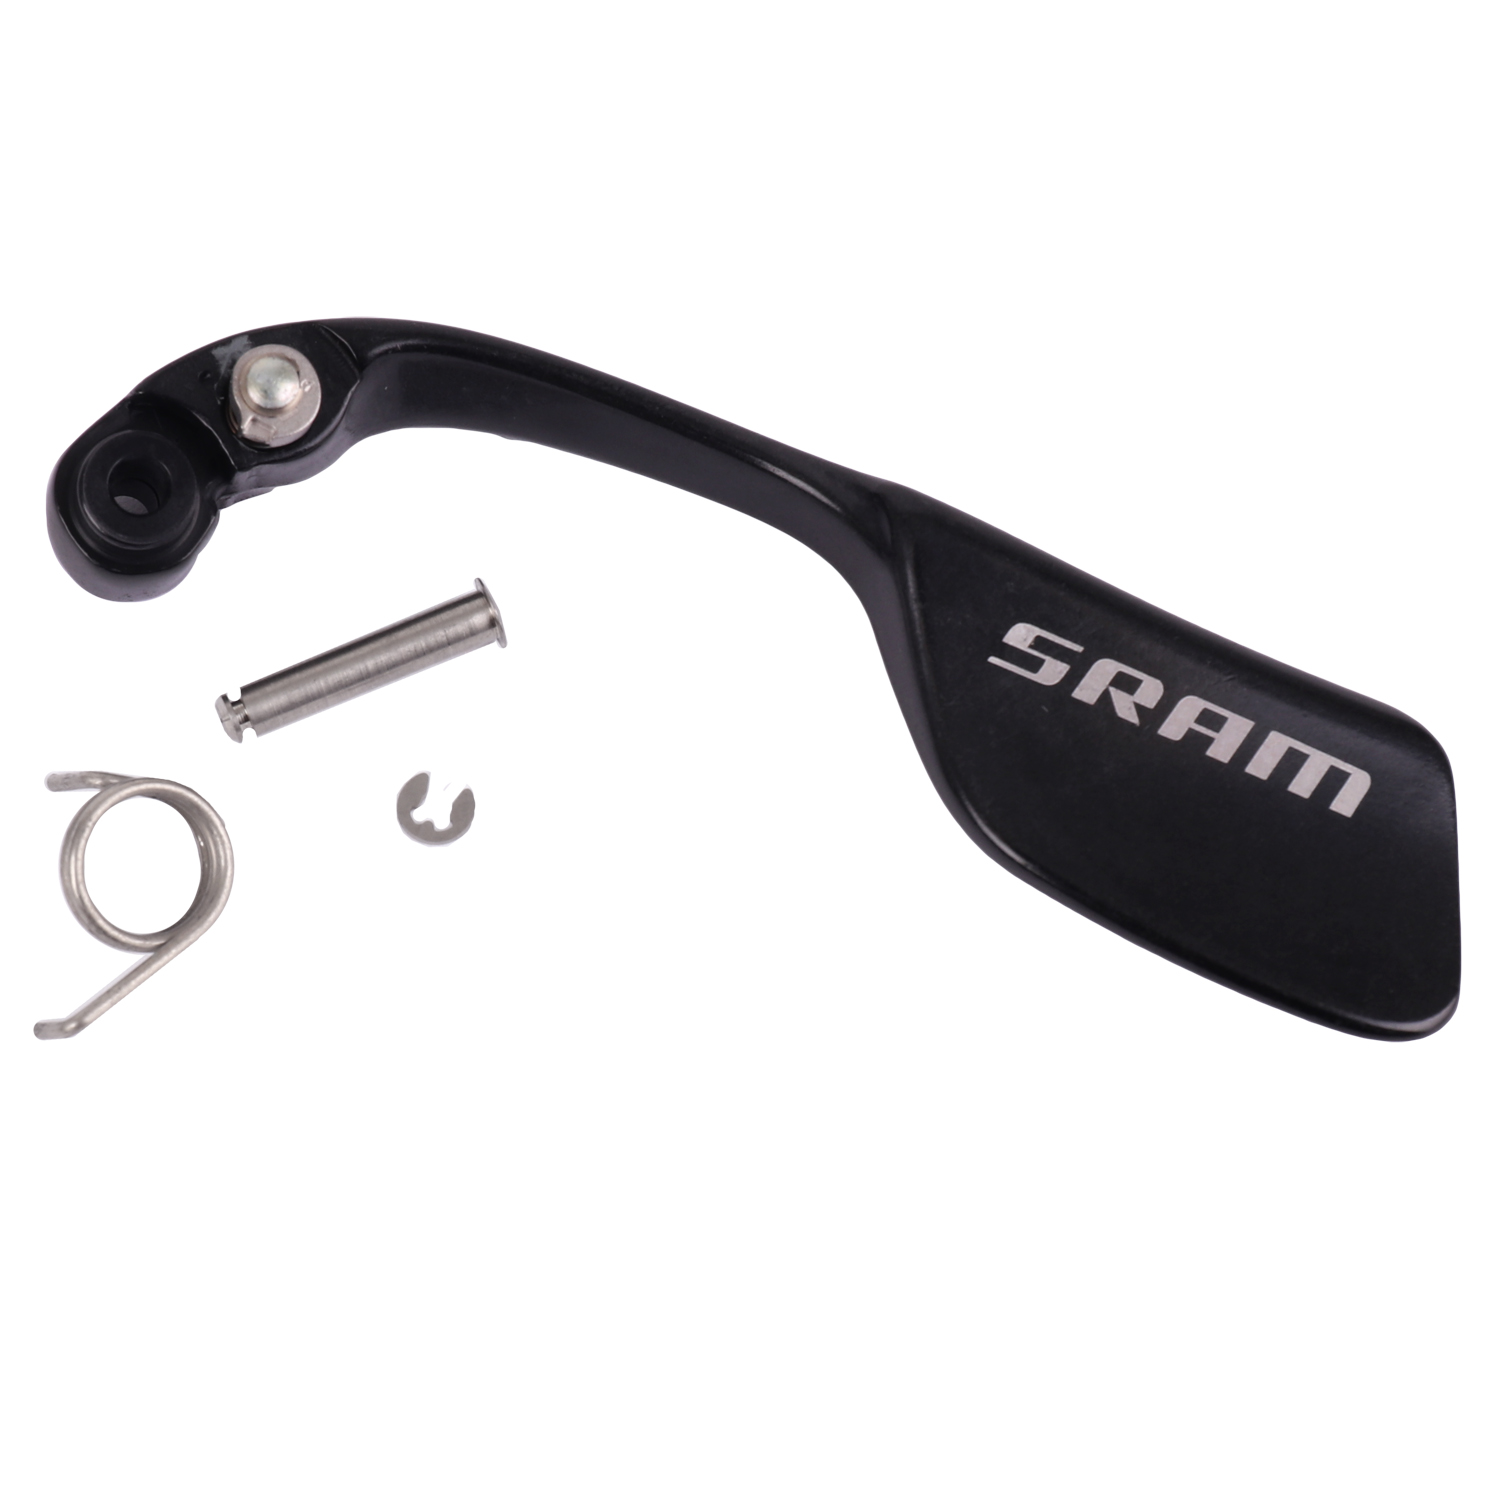 Picture of SRAM APEX/RIVAL Shift Lever Assembly Kit - left - Model Year 2009-2011 - 11.7015.052.040